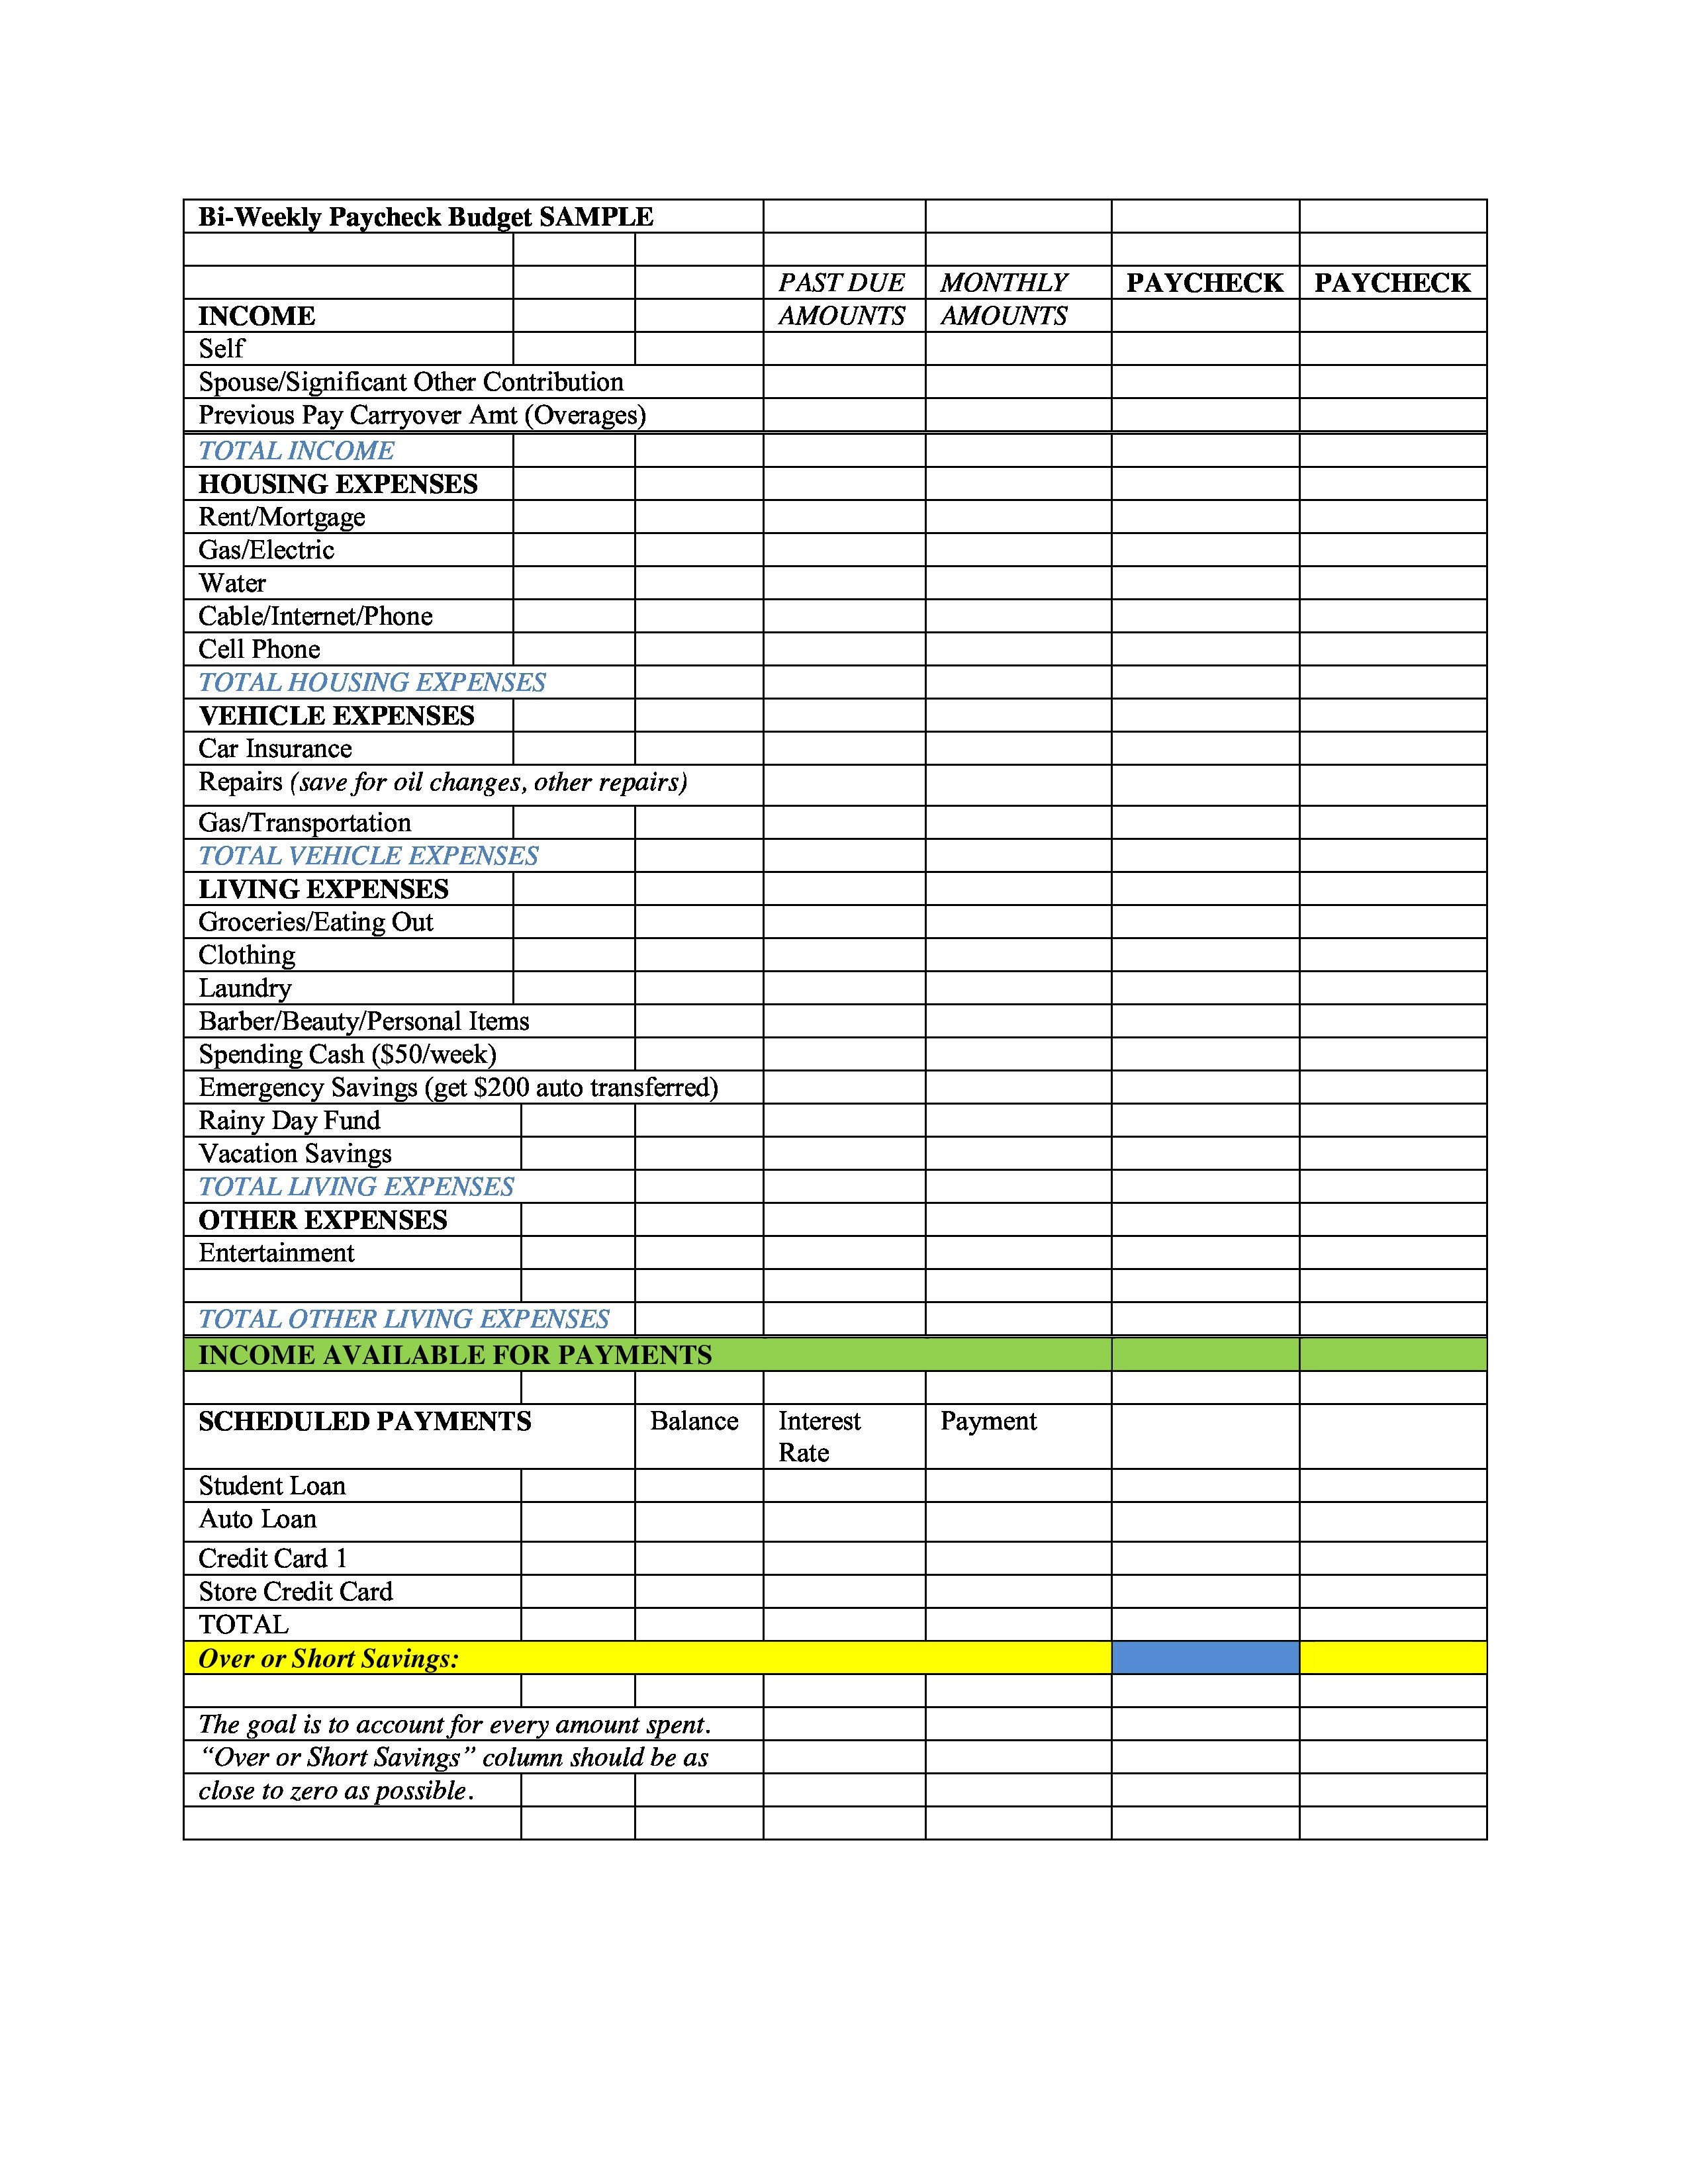 Free Bi Weekly Paycheck Budget Templates At Com Document To Spreadsheet